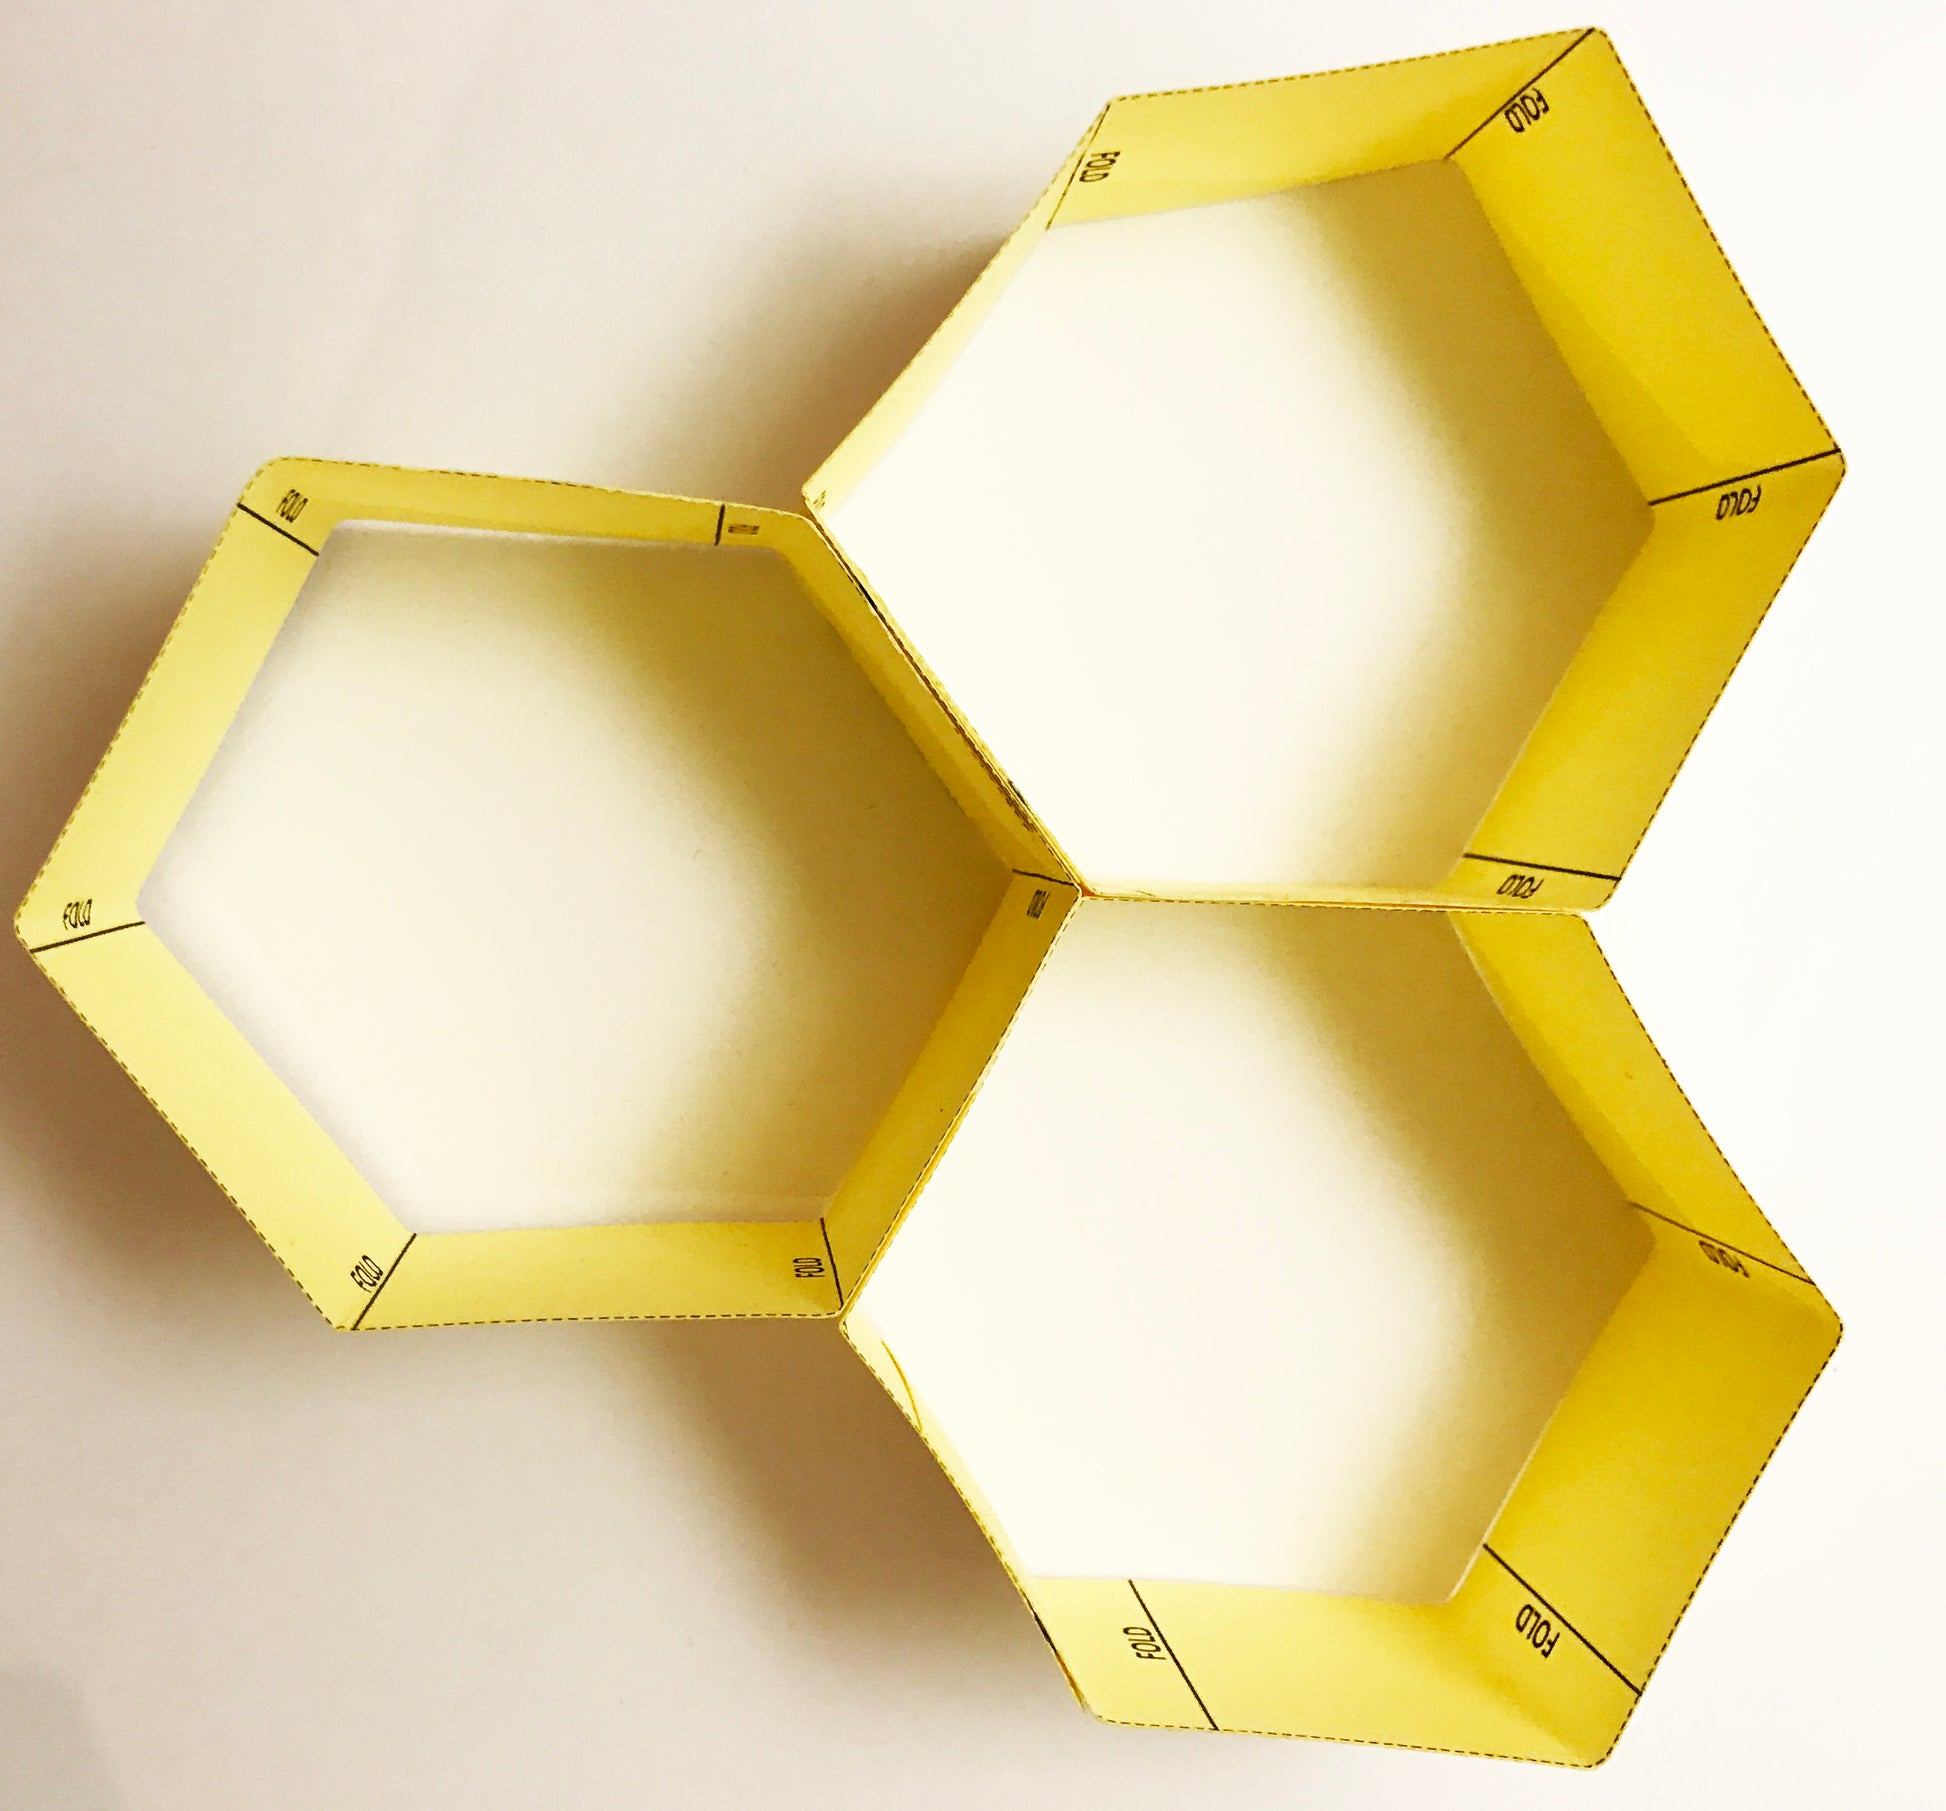 Build a beehive craft project